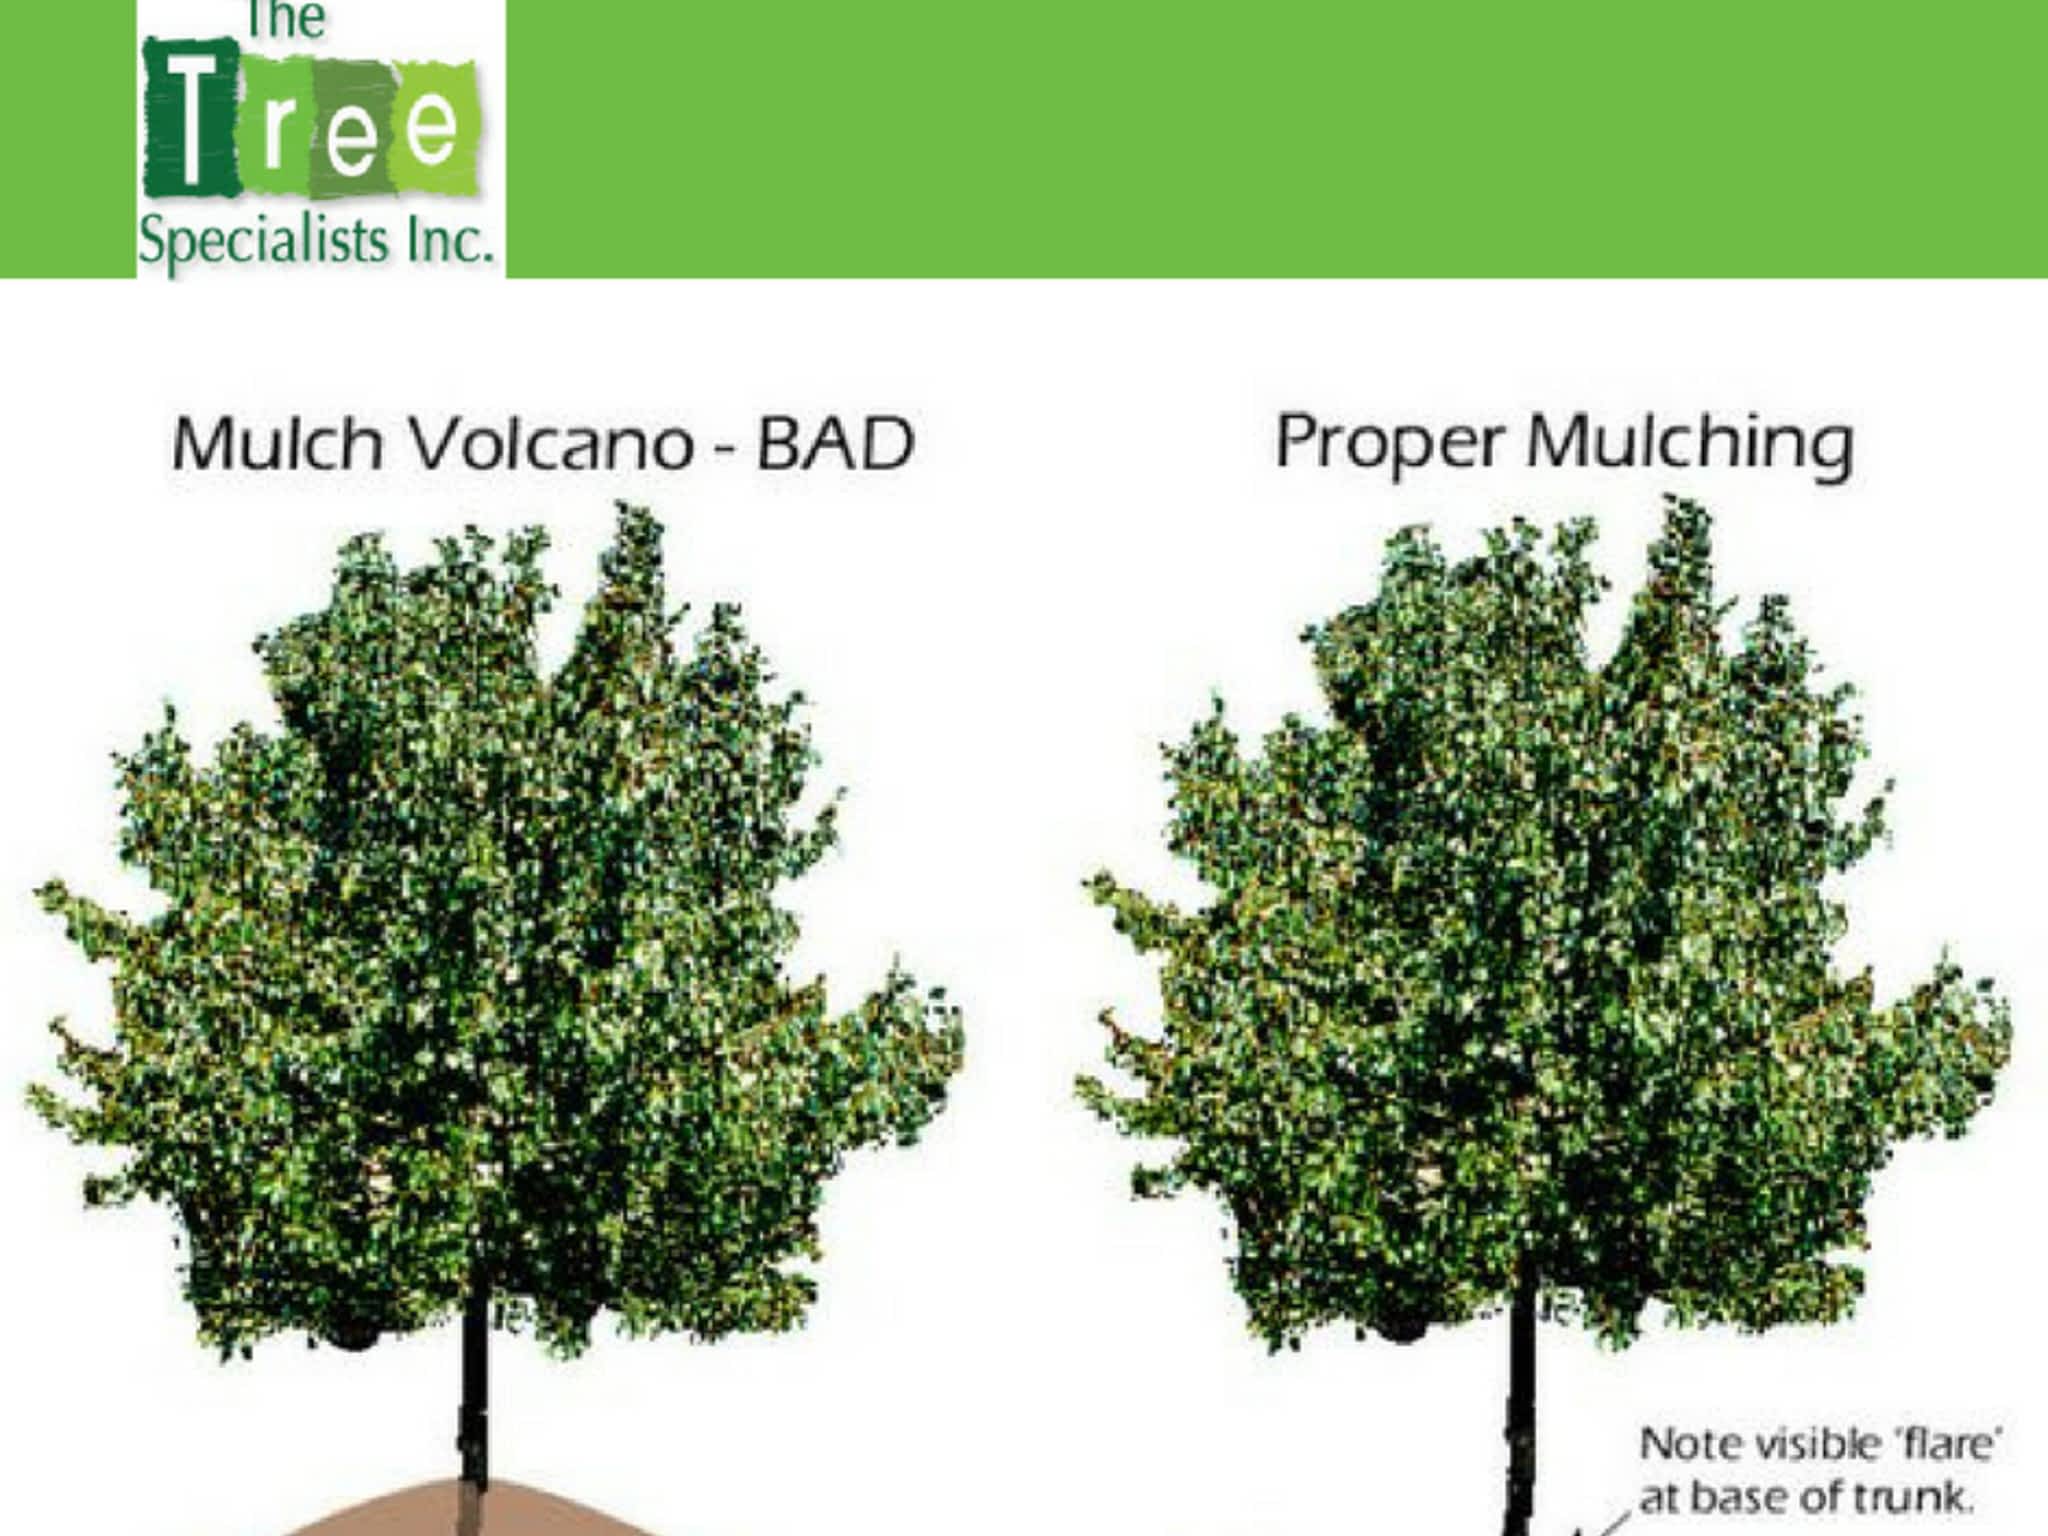 photo The Tree Specialists Inc